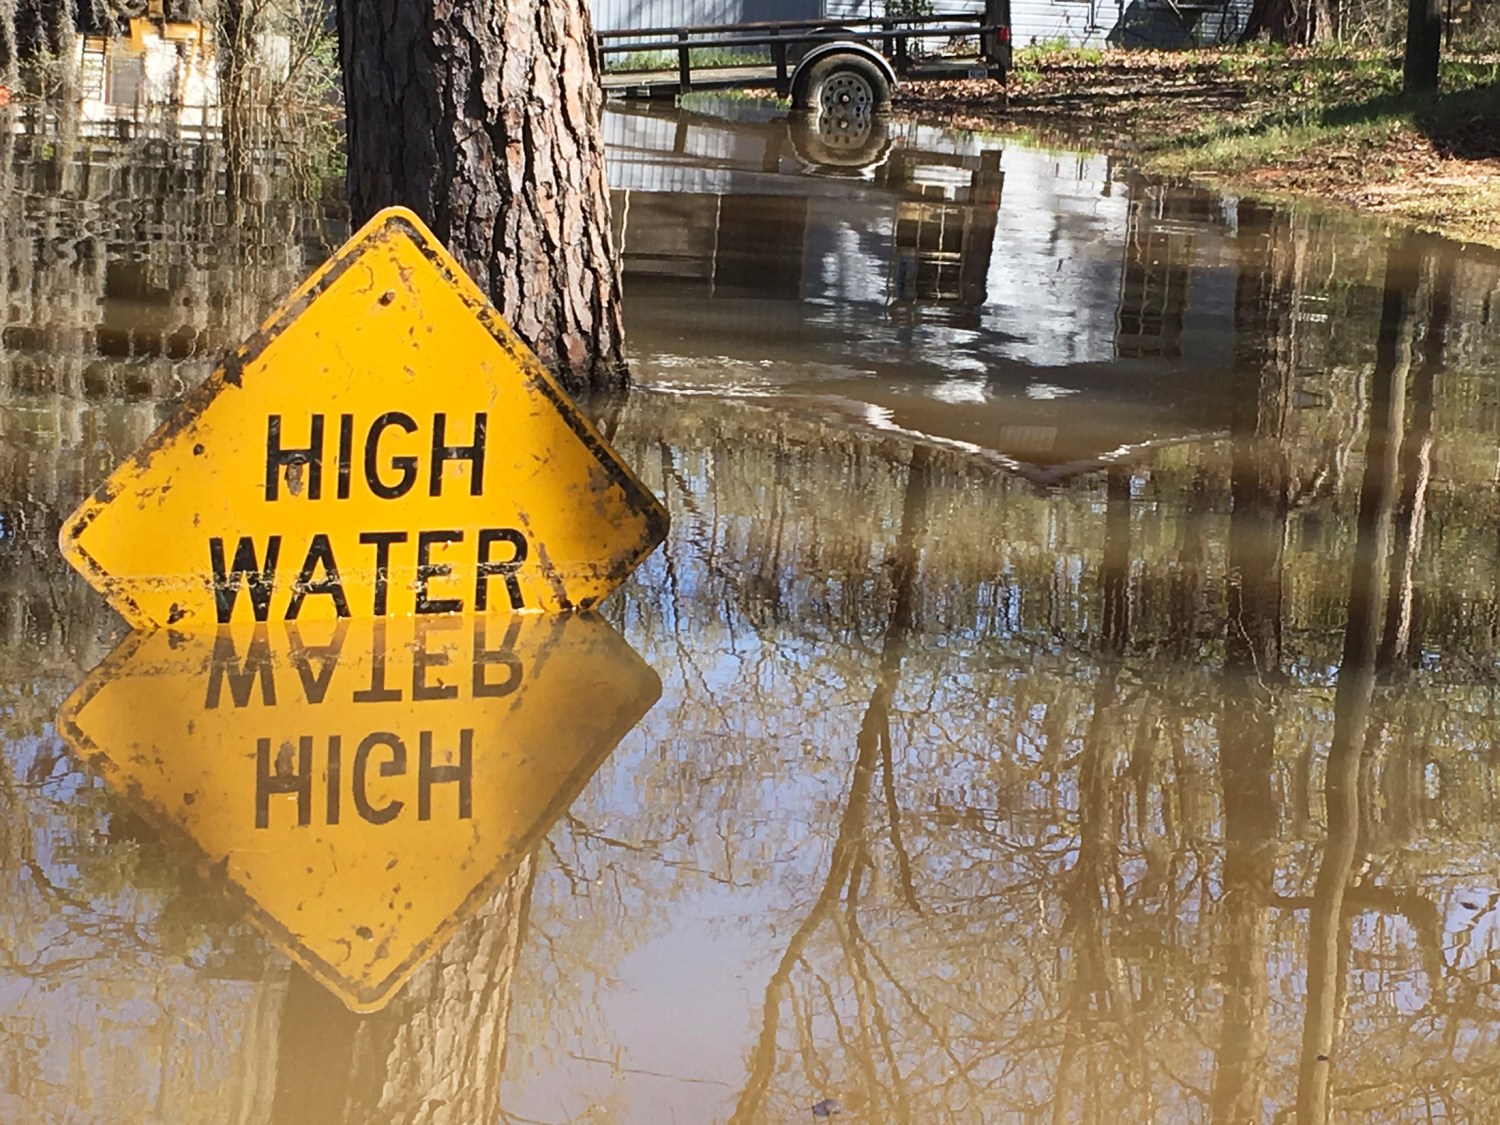 REUTERS/Therese Apel - A high water sign is submerged near Lake Bistineau in Webster Parish, Louisiana March 14, 2016. The death toll from storms in Southern U.S. states rose to five as storm-weary residents of Louisiana and Mississippi watched for more flooding on Monday from drenching rains that inundated homes, washed out roads and prompted thousands of rescues.